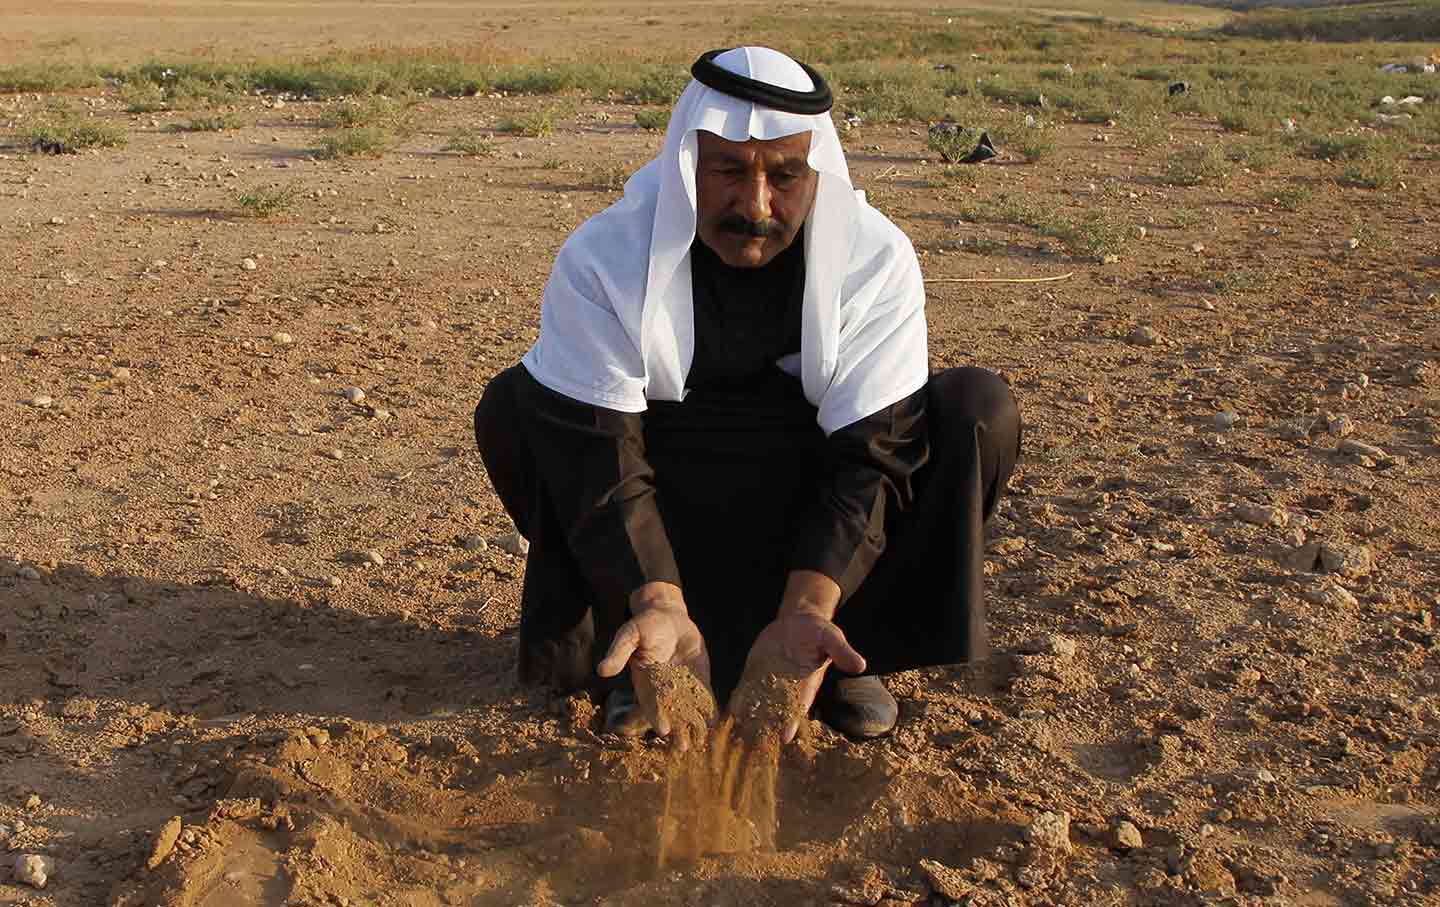 Sheikh Ghazi Rashad Hrimis handles dried earth in the parched region of Raqqa province in eastern Syria, during the drought that displaced half a million people, November 11, 2010. (Reuters/Khaled al-Hariri)